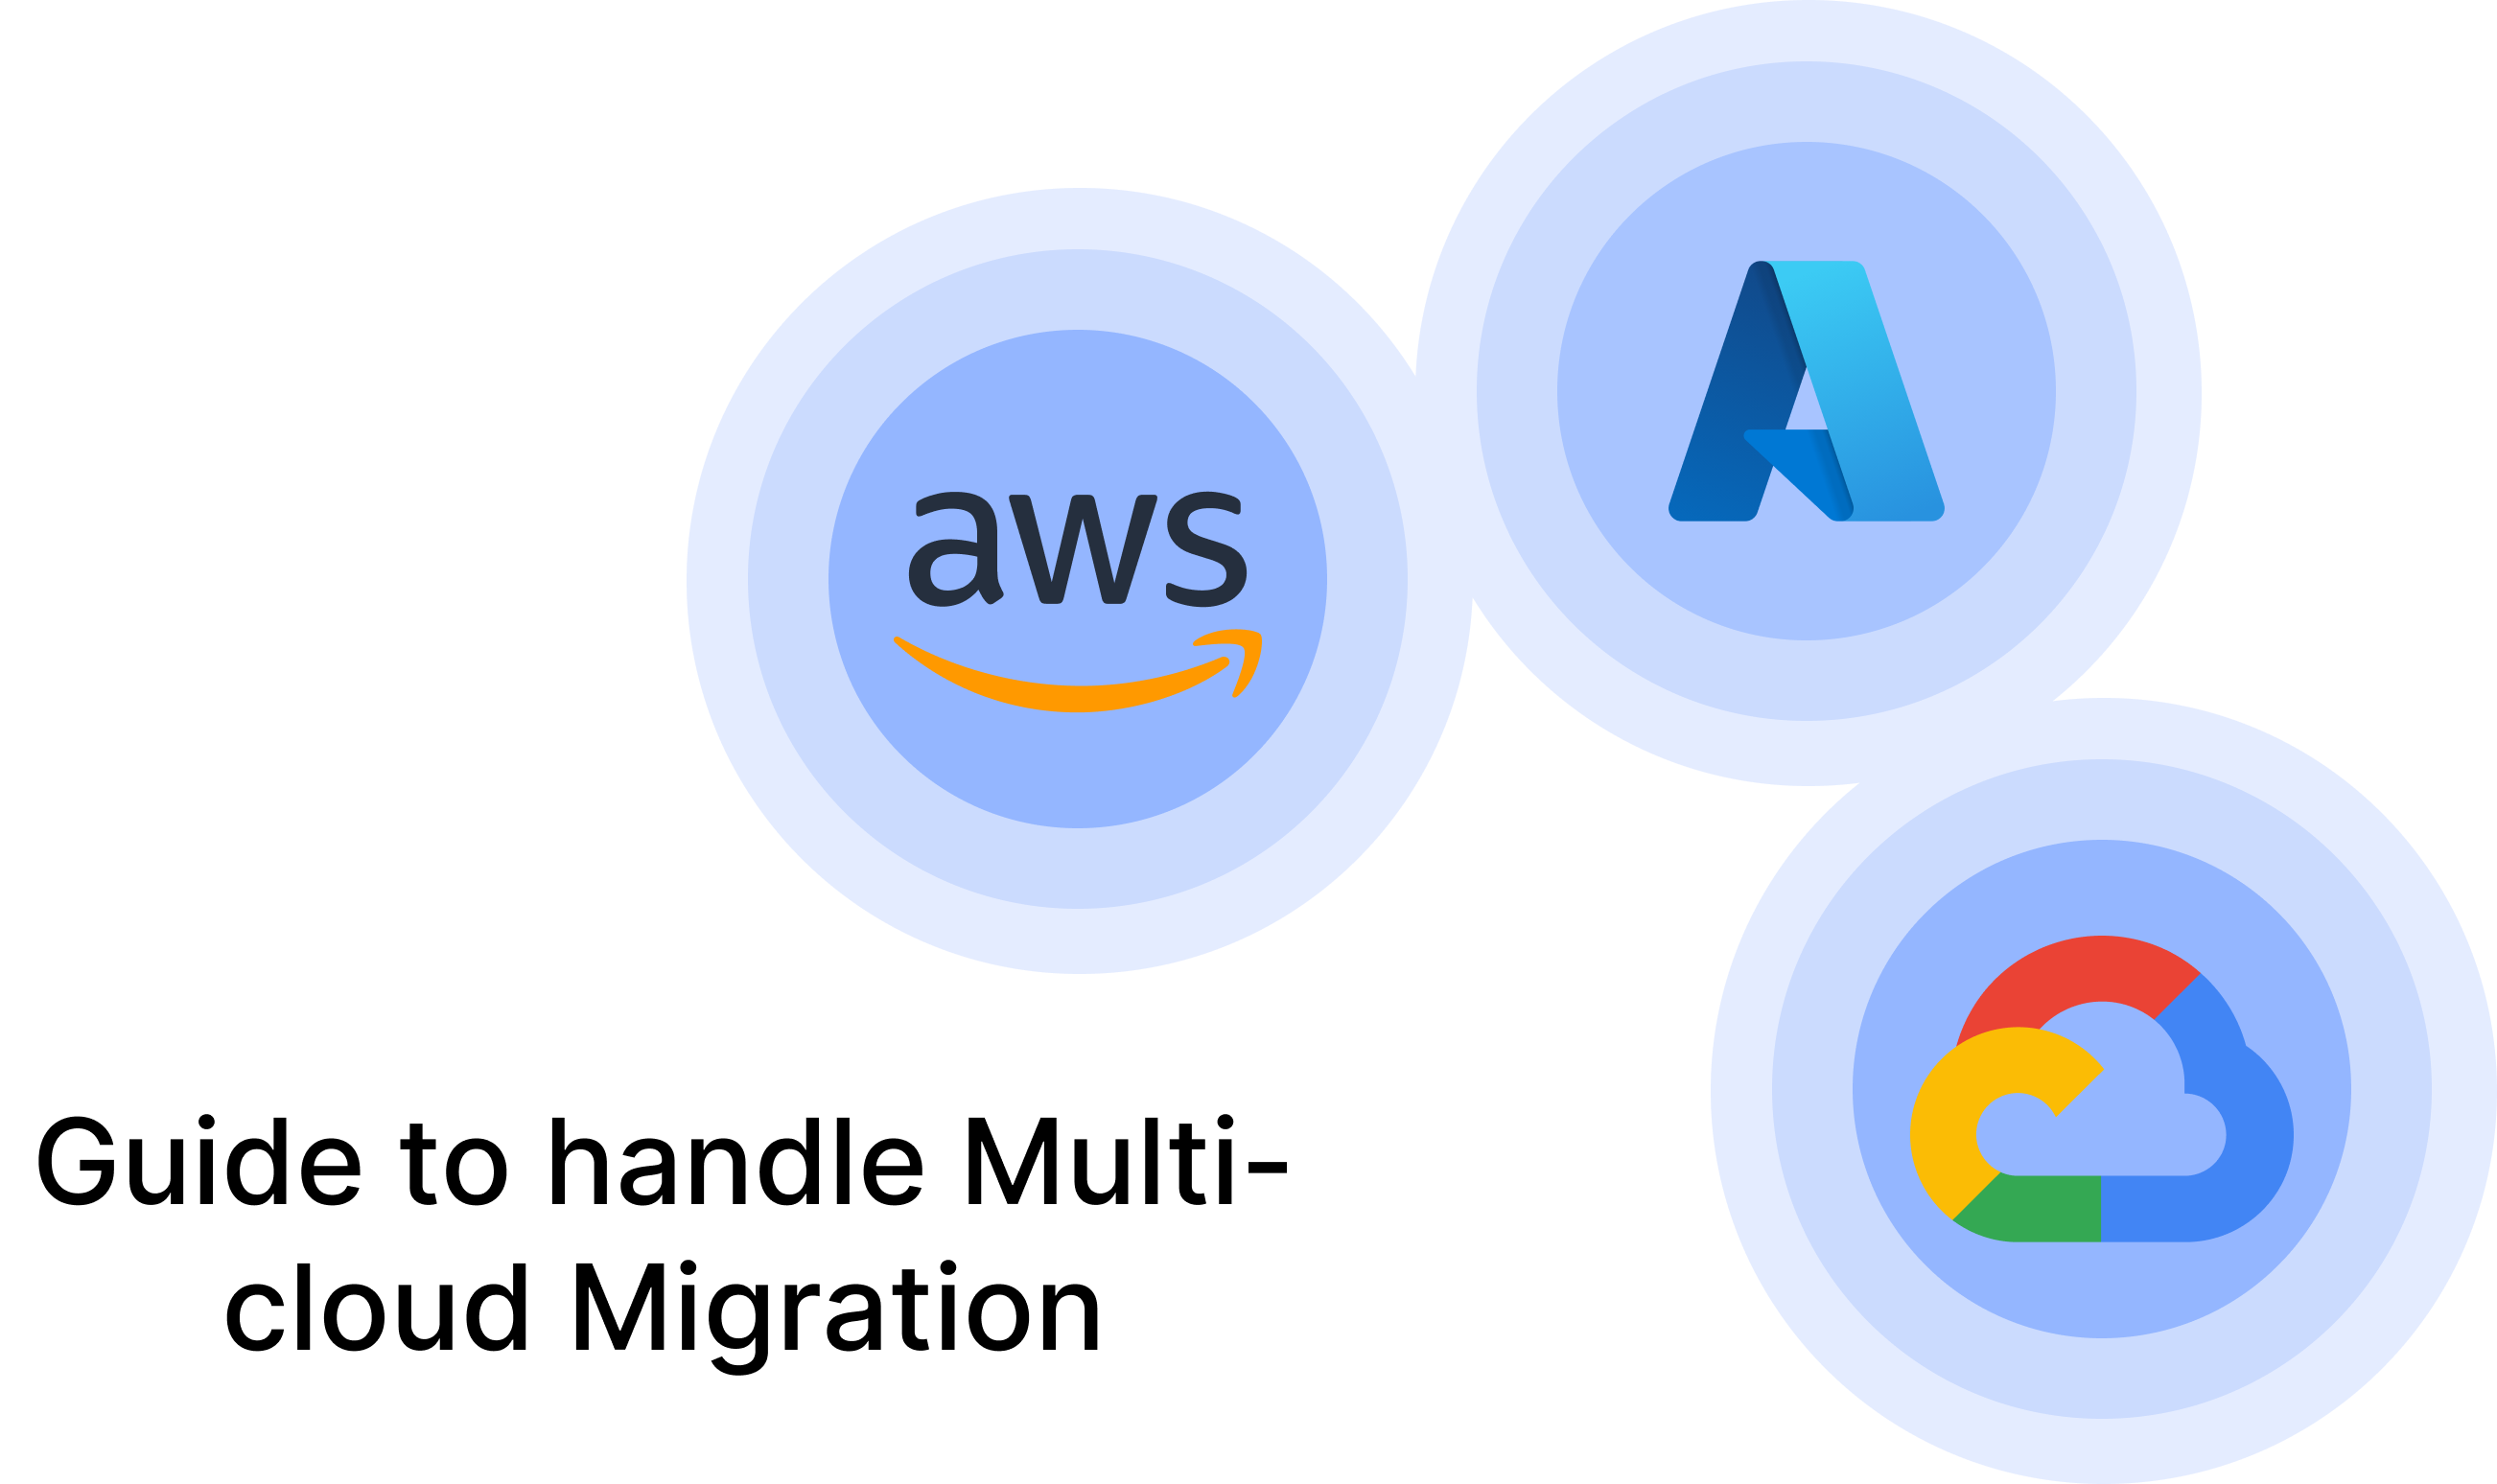 Title image for a cloud migration guide and logos of popular cloud platforms (GCP, AWS, and Azure)